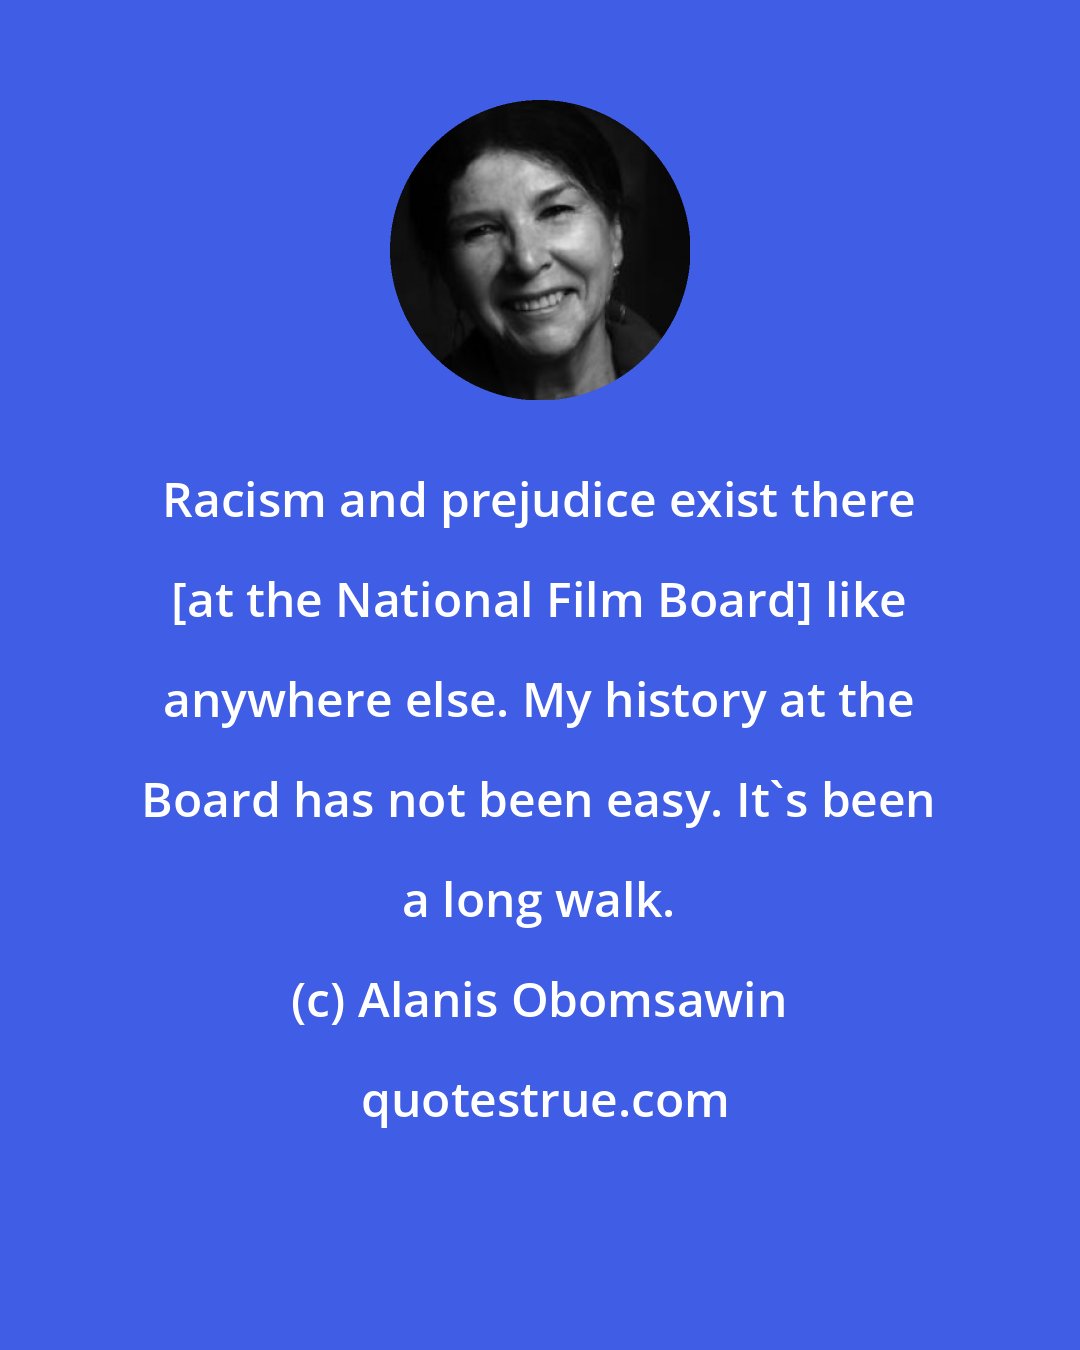 Alanis Obomsawin: Racism and prejudice exist there [at the National Film Board] like anywhere else. My history at the Board has not been easy. It's been a long walk.